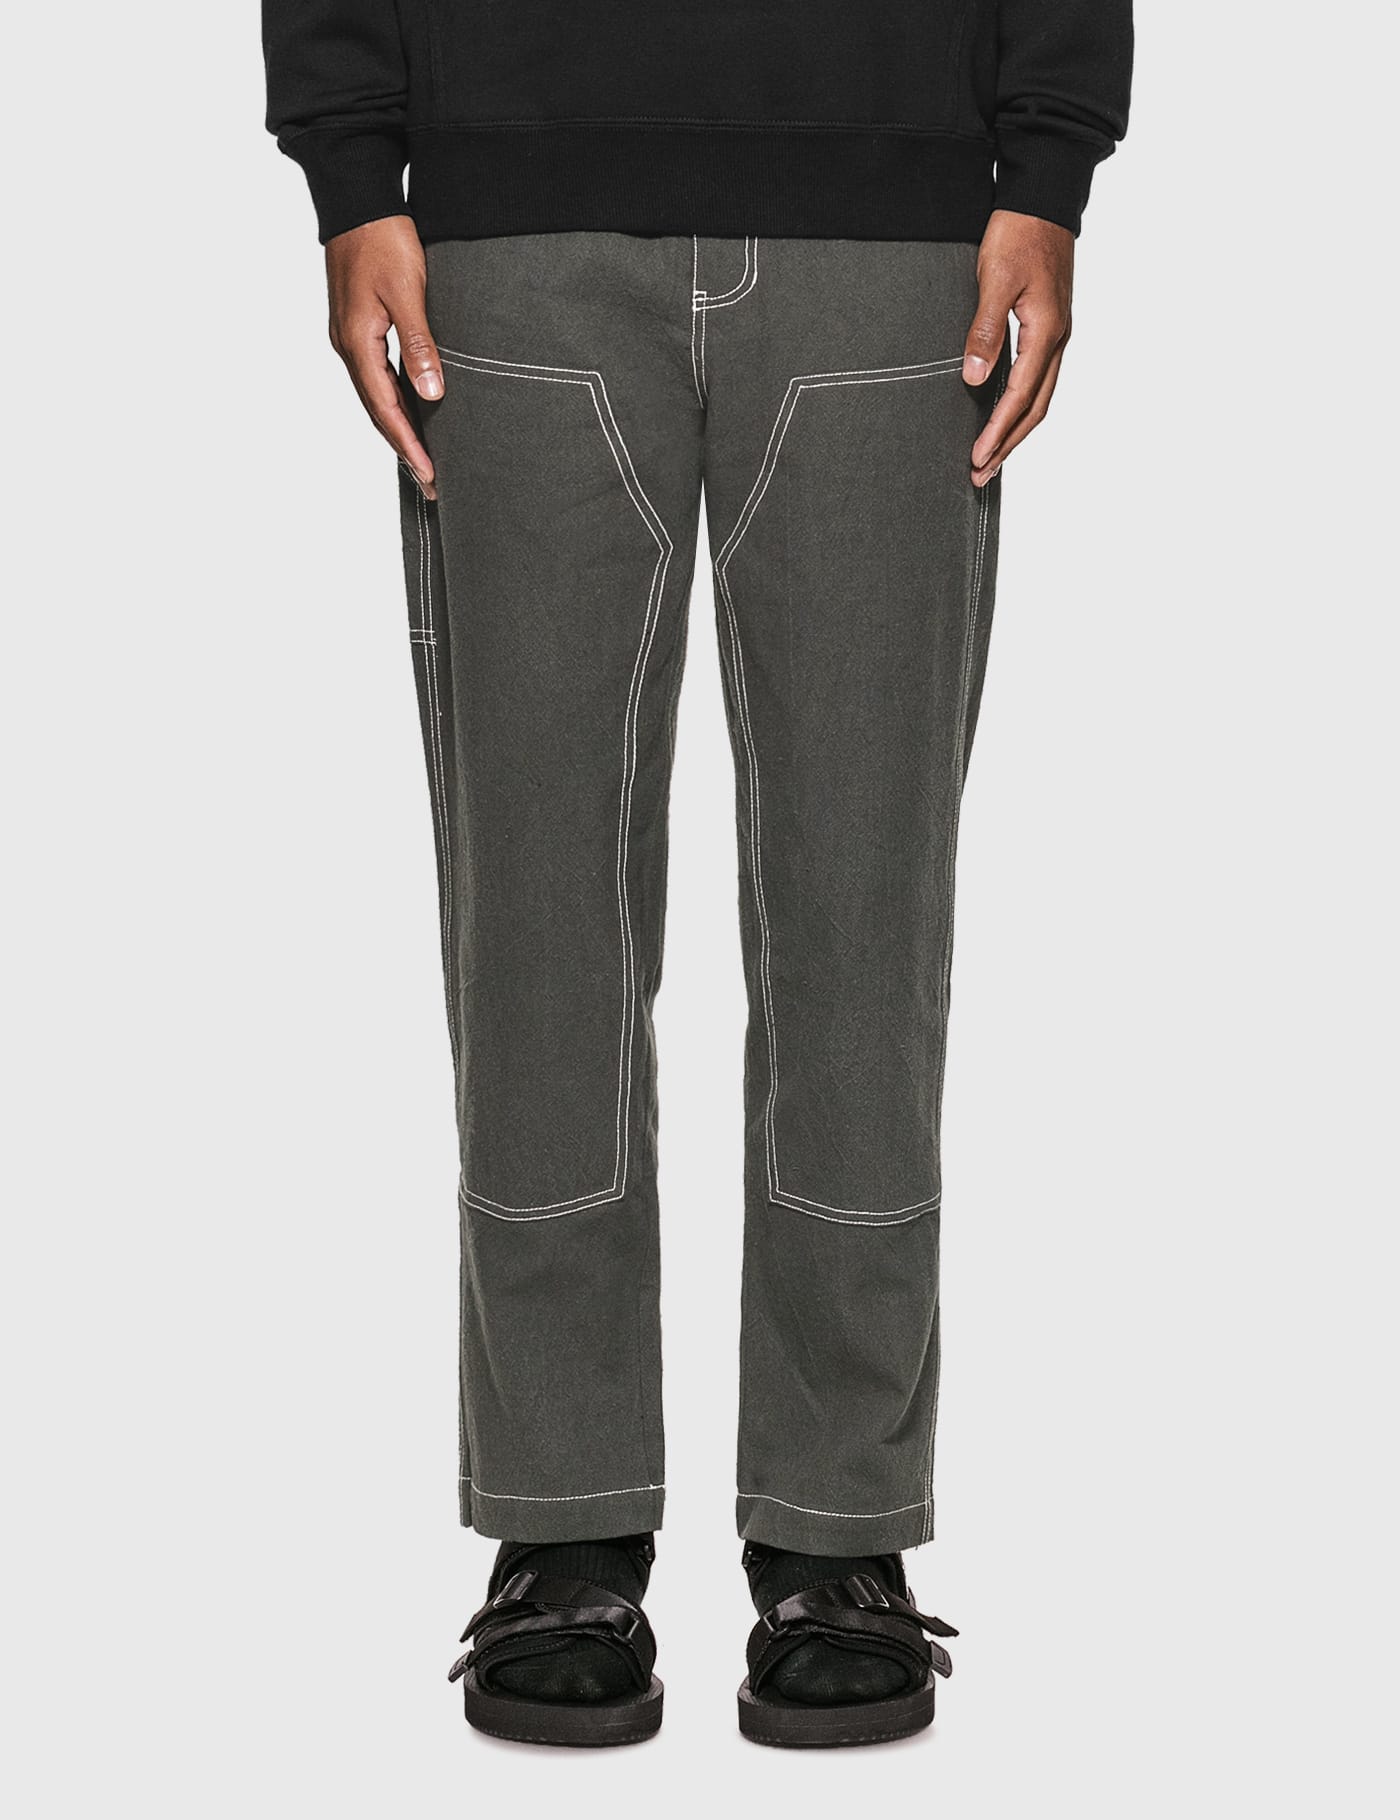 Stüssy - Solid Linen Work Pants | HBX - Globally Curated Fashion 